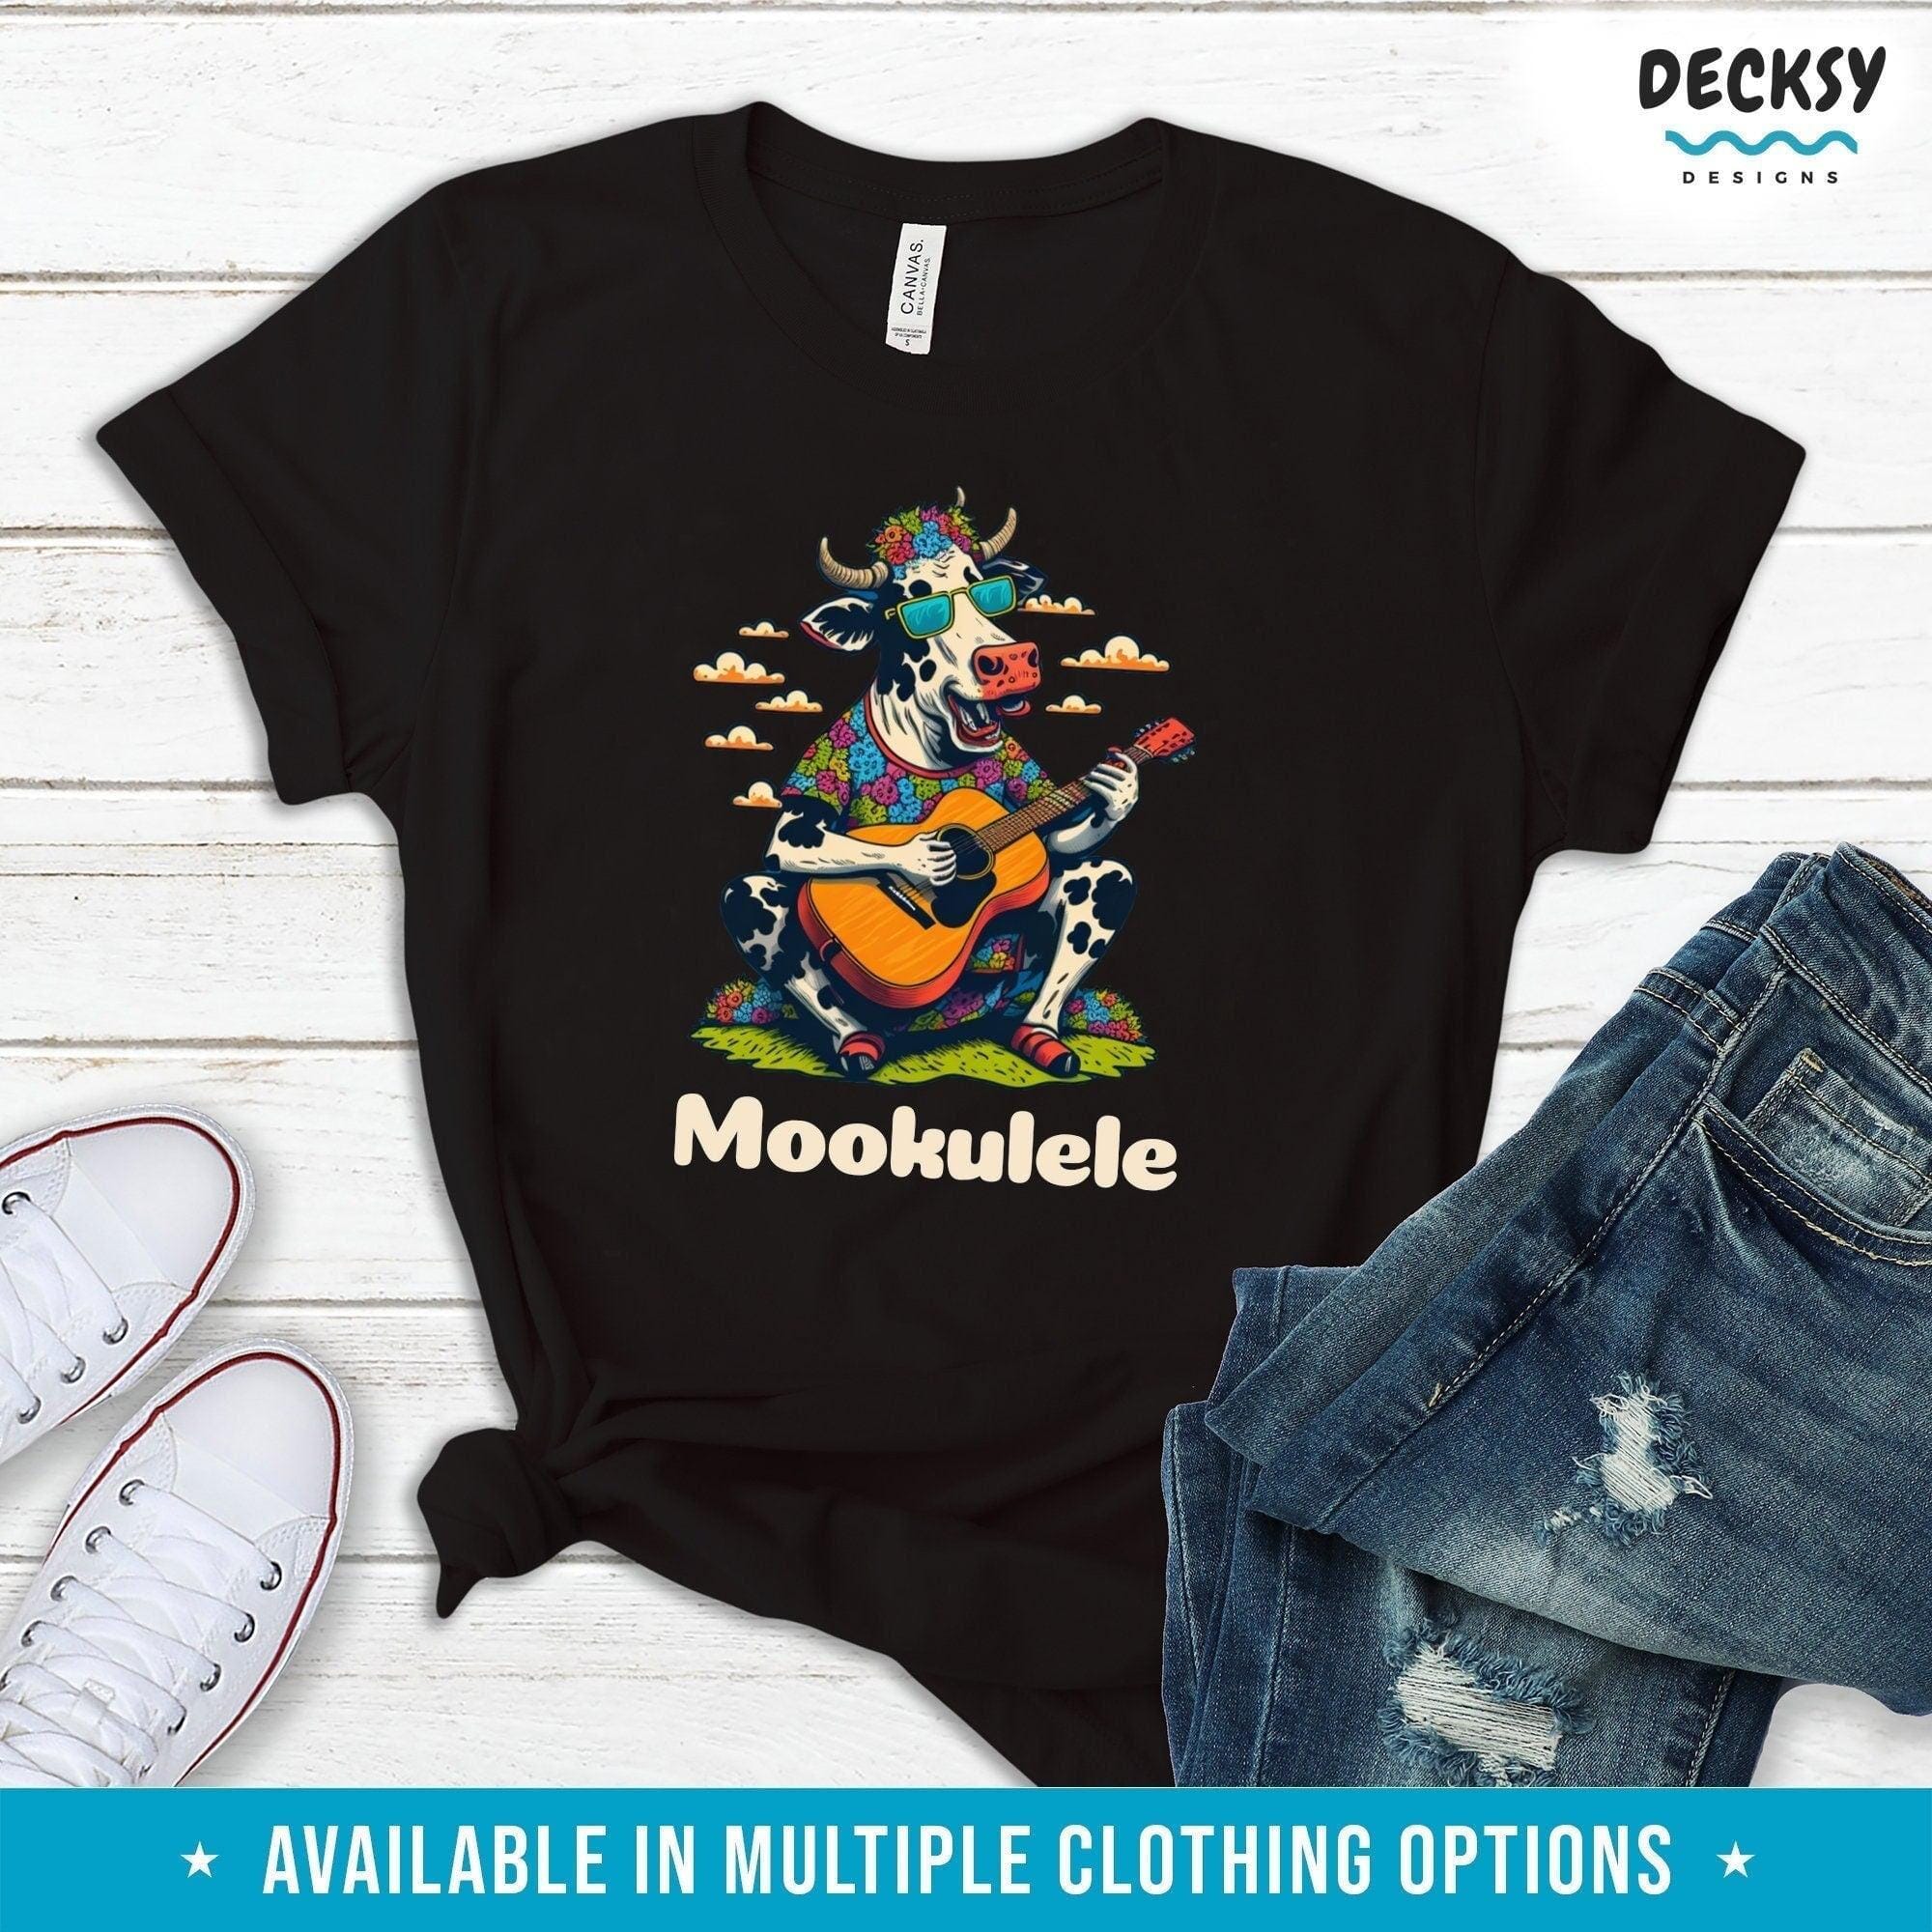 Mookulele Shirt, Funny Music Gift-Clothing:Gender-Neutral Adult Clothing:Tops & Tees:T-shirts:Graphic Tees-DecksyDesigns